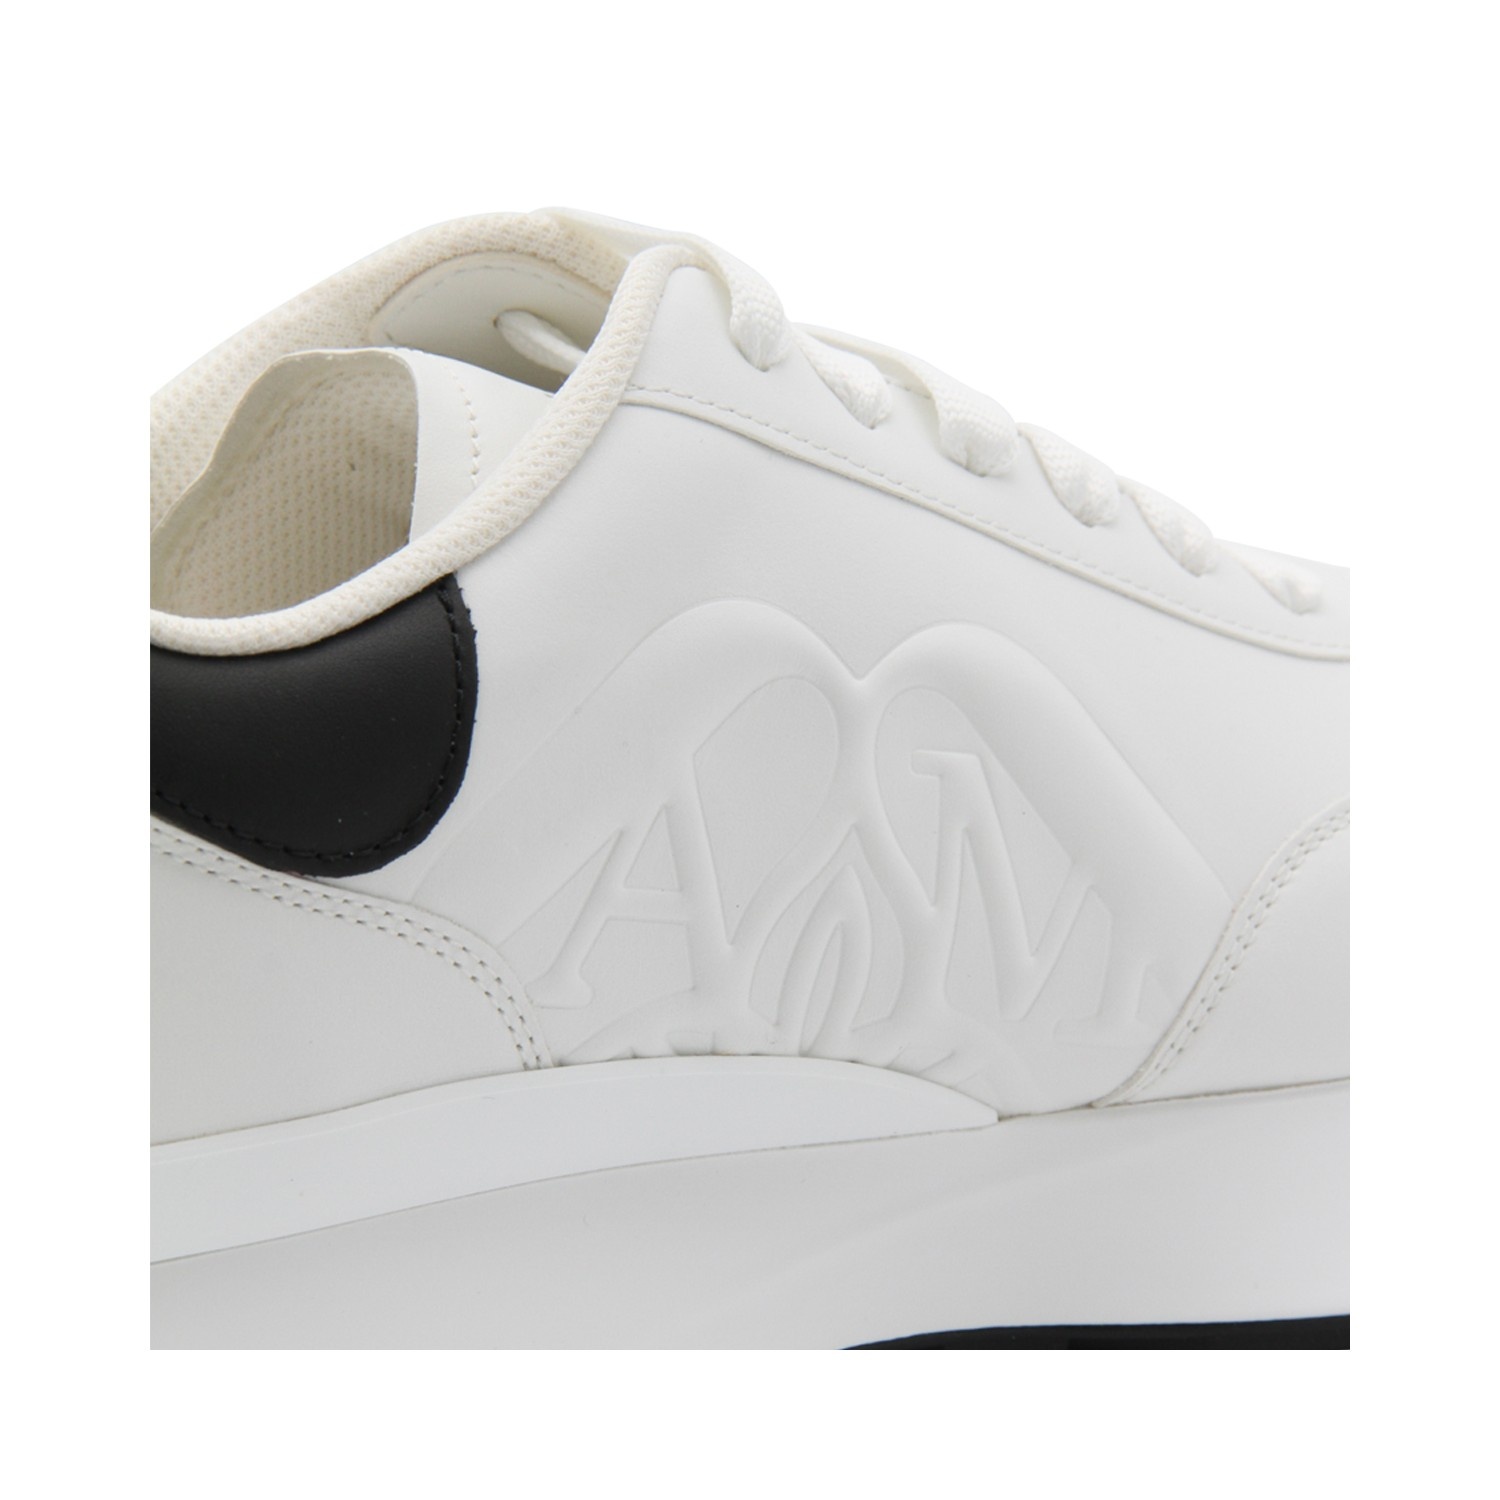 WHITE AND BLACK LEATHER SPRINT SNEAKERS - 4